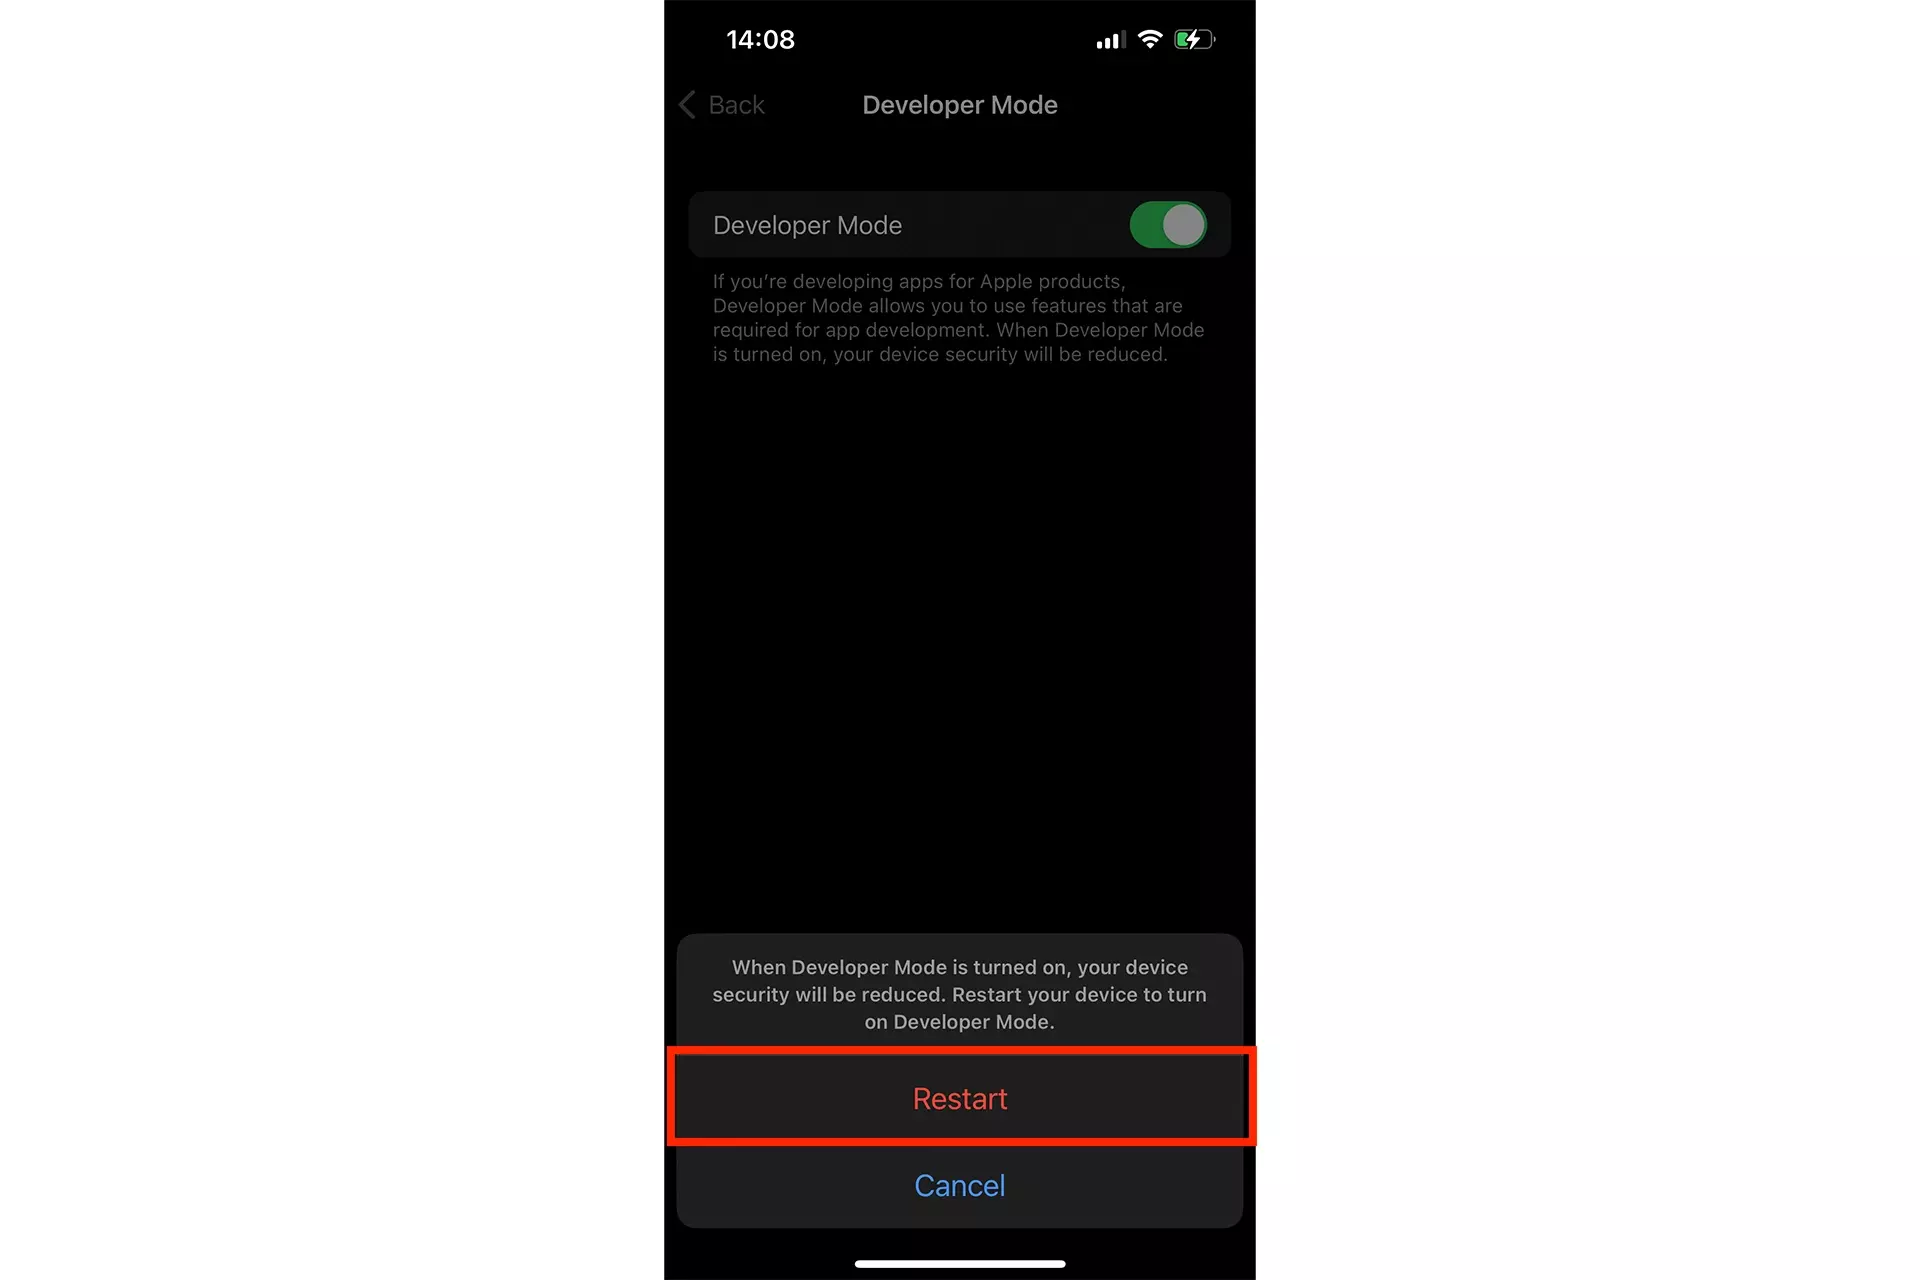 A screenshot of the Developer Mode view within the Settings app, demonstrating the modal that appears after you turn on developer mode. This modal includes two options "Restart" or "Cancel." We have highlighted "Restart."